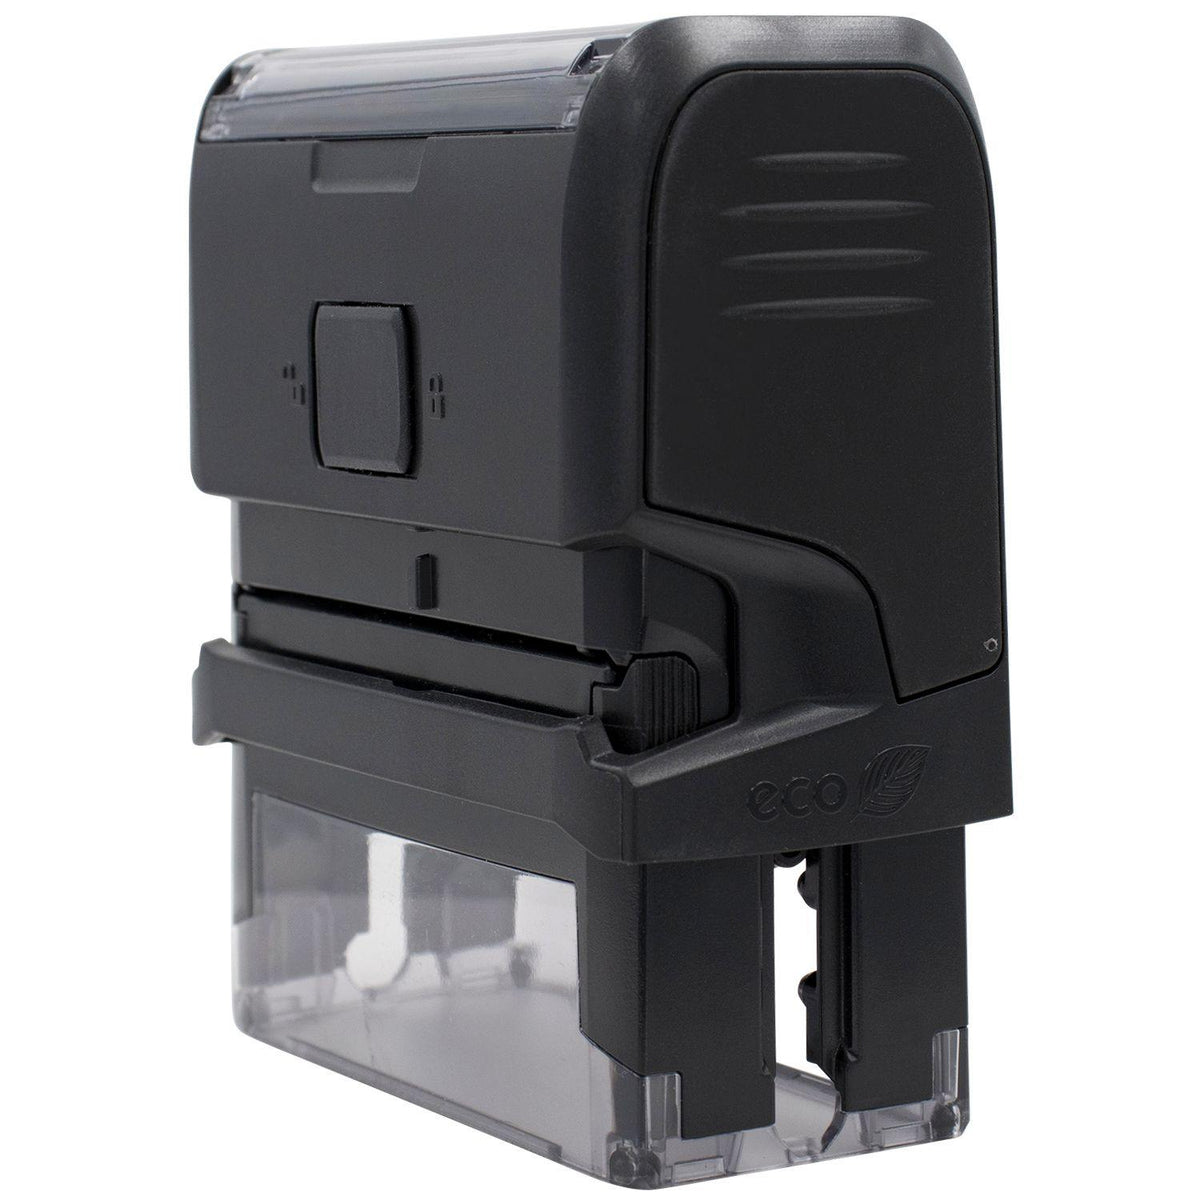 Large Self-Inking Paid with Ck No Stamp Stamp - Engineer Seal Stamps - Brand_Trodat, Impression Size_Large, Stamp Type_Self-Inking Stamp, Type of Use_Business, Type of Use_Finance, Type of Use_Office